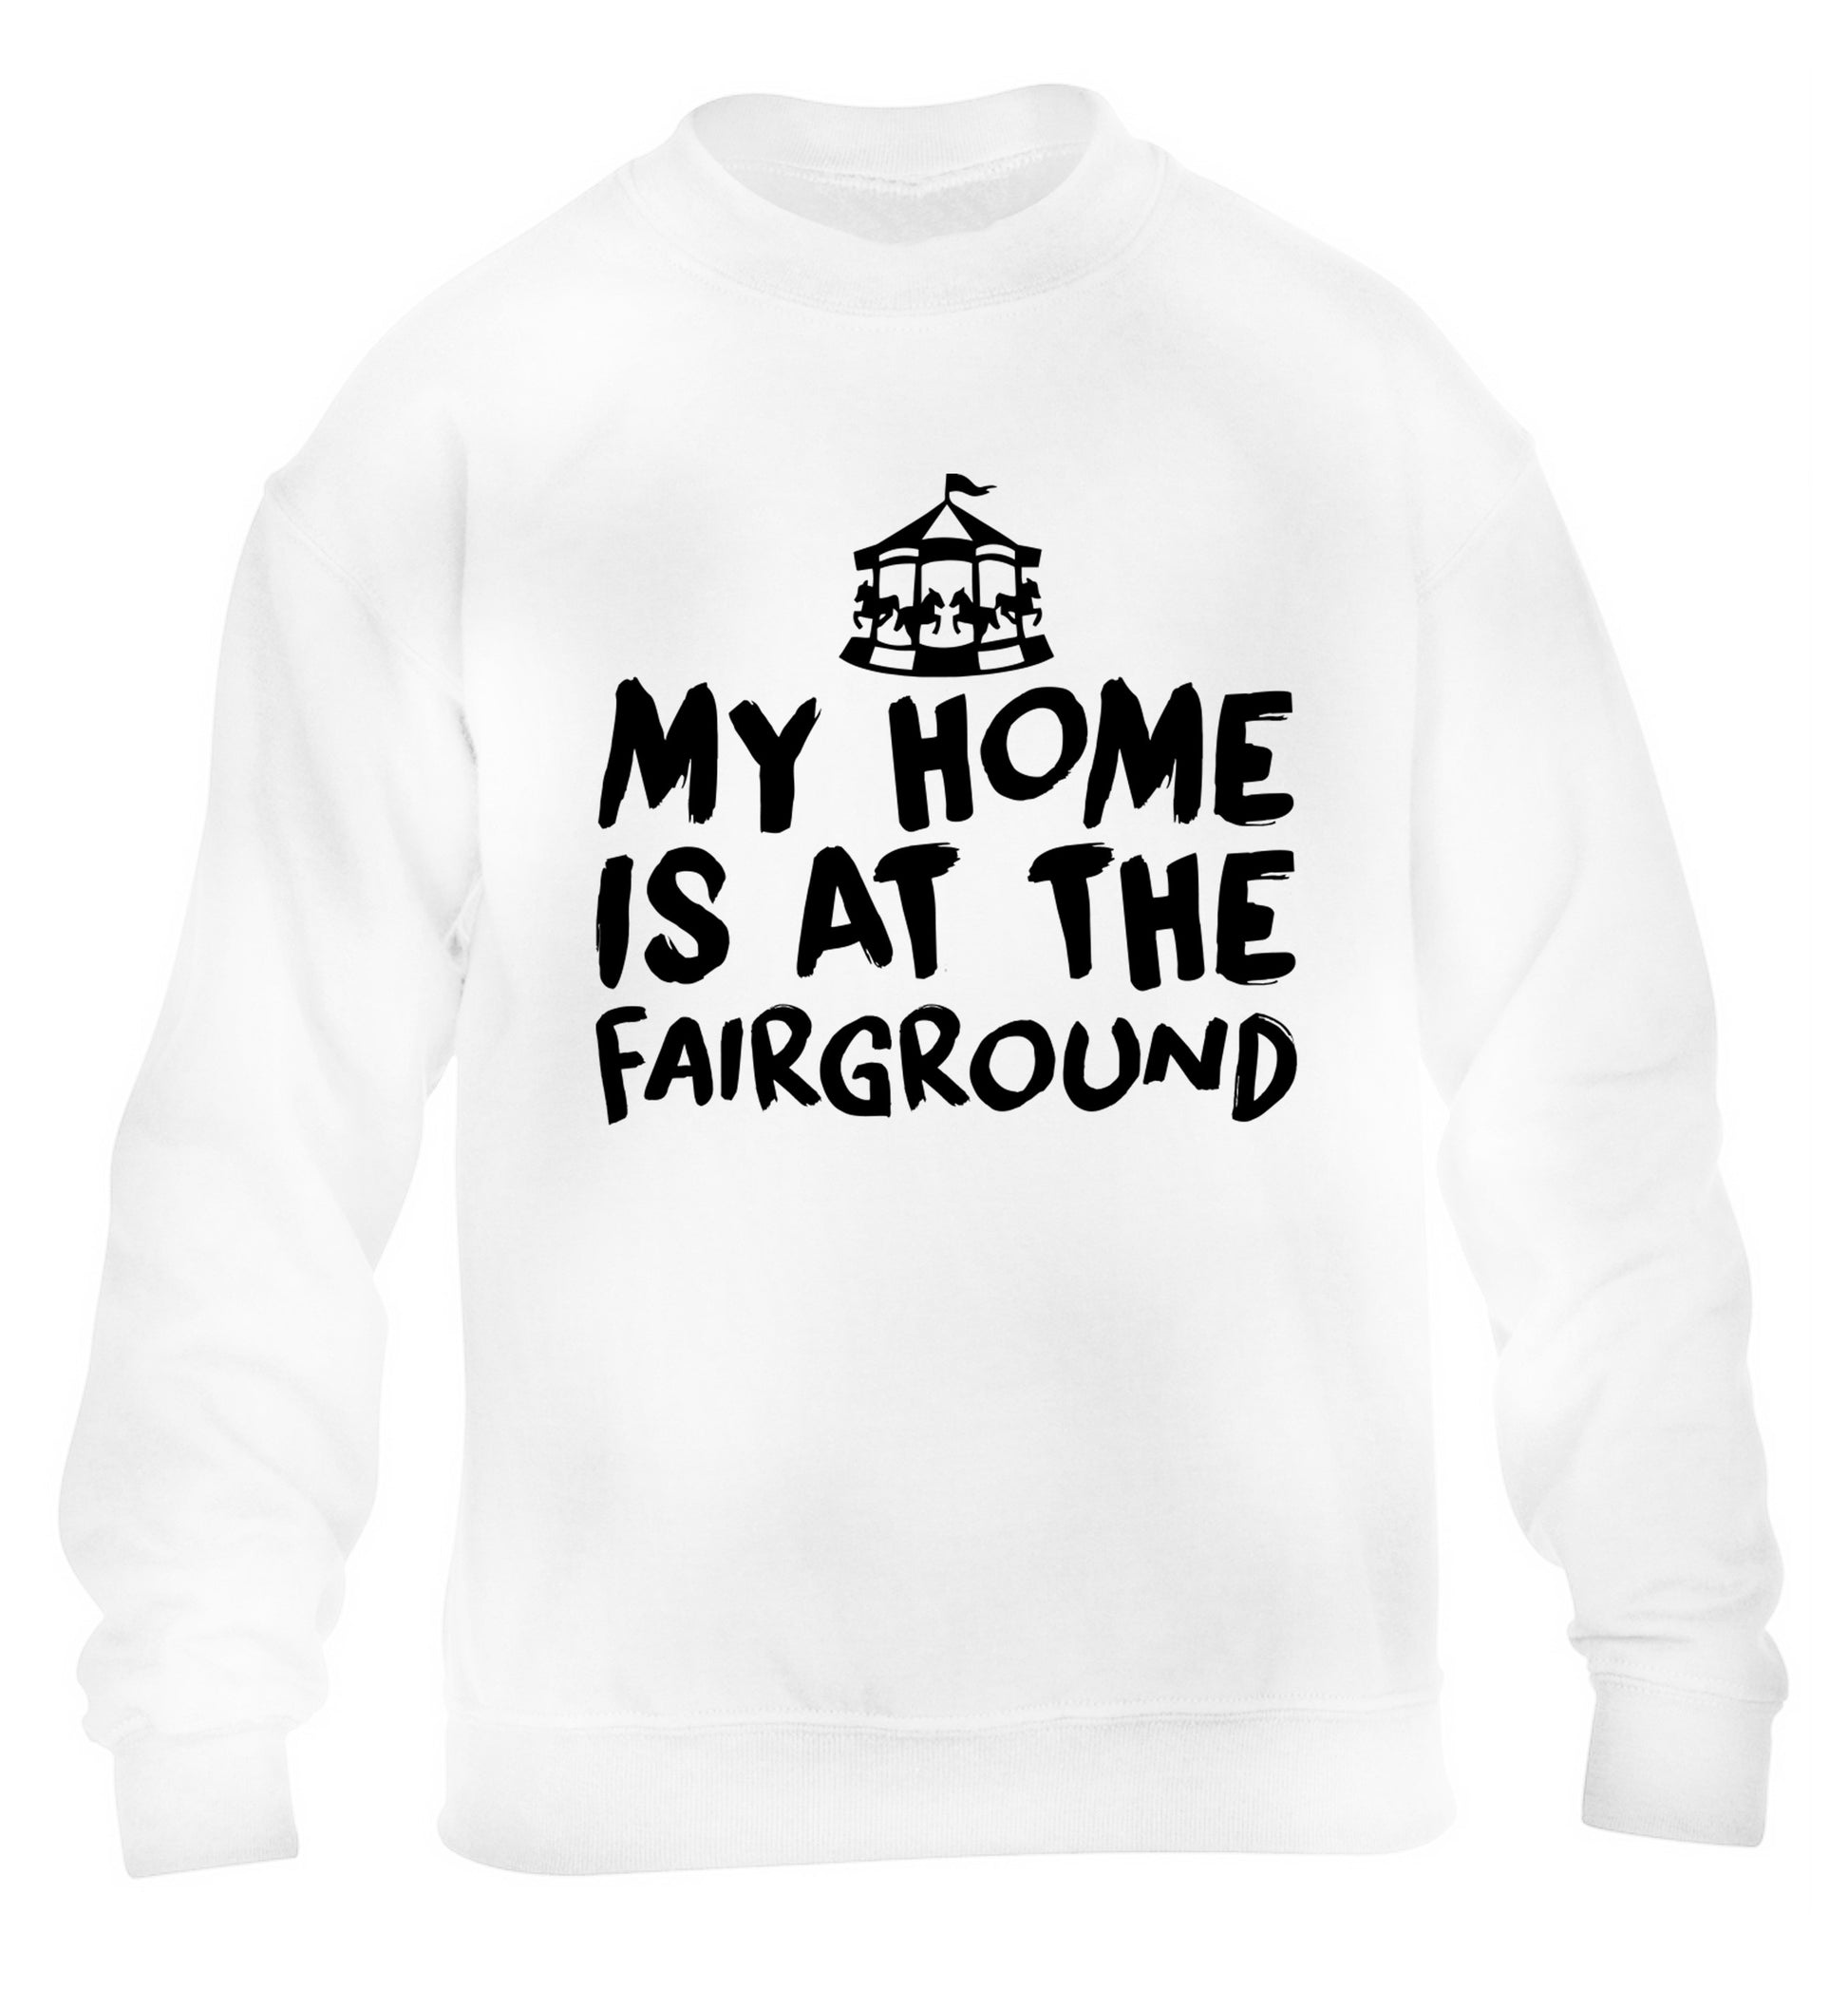 My home is at the fairground children's white sweater 12-14 Years